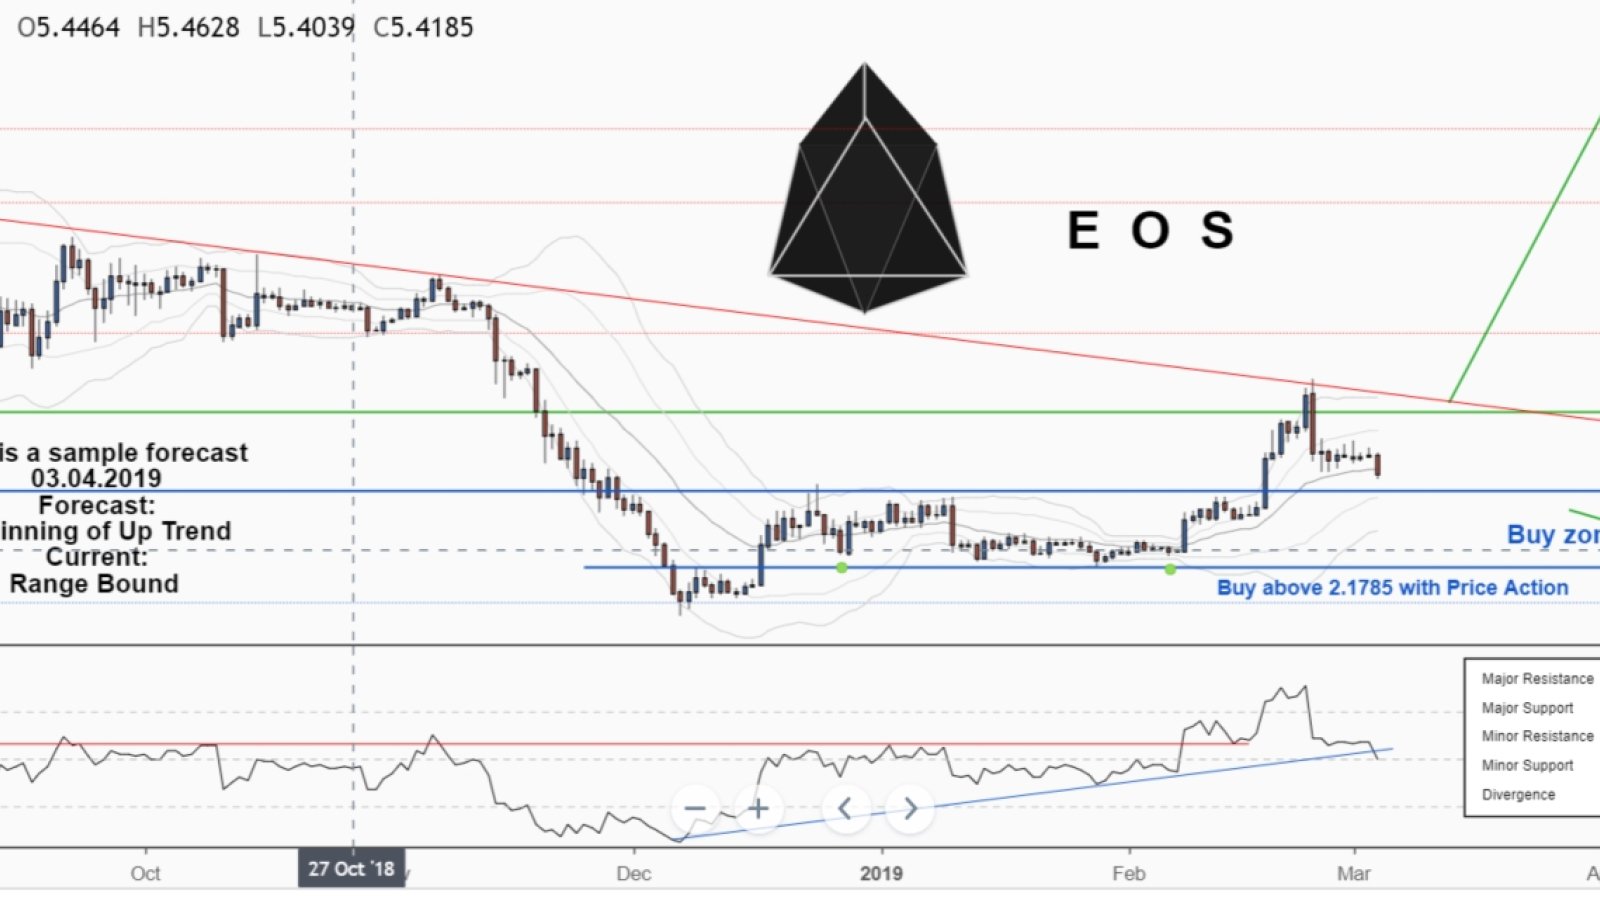 EOS Short-Term Price Prediction for March 2019 – Traders Hope for $5 EOS Price But Will Bearish Trend Be Reversed? 